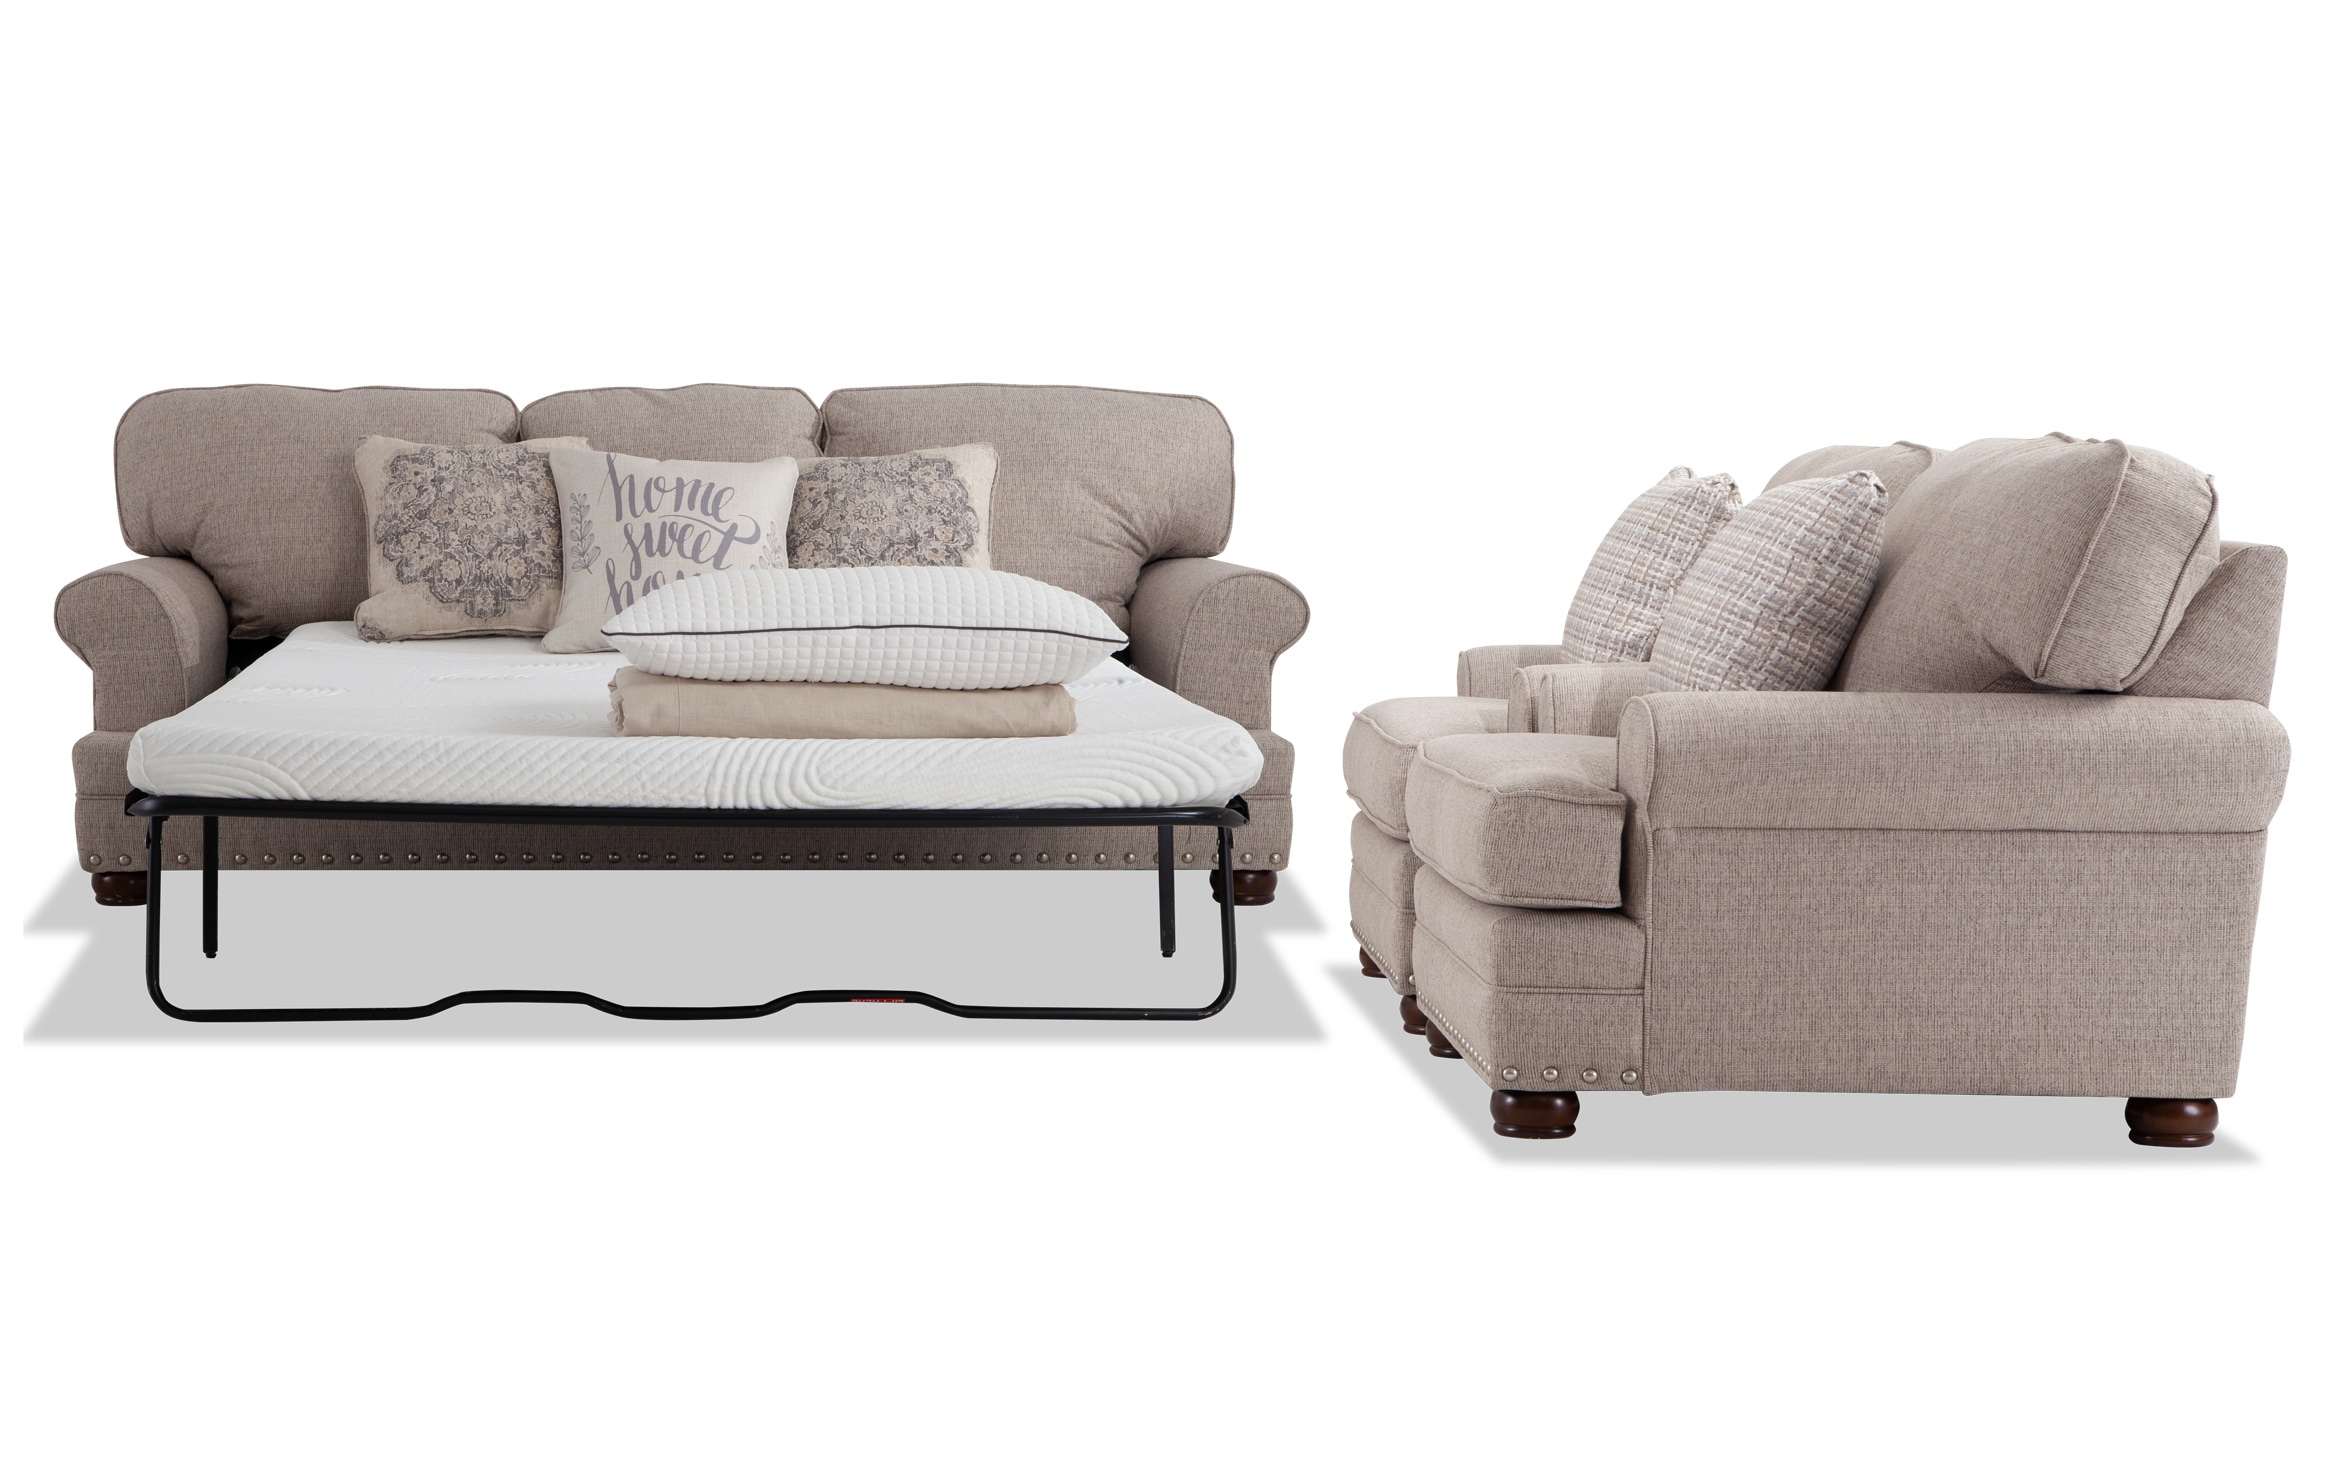 Sleeper Sofa And Chair Set Top Sellers, UP TO 50% OFF | www 